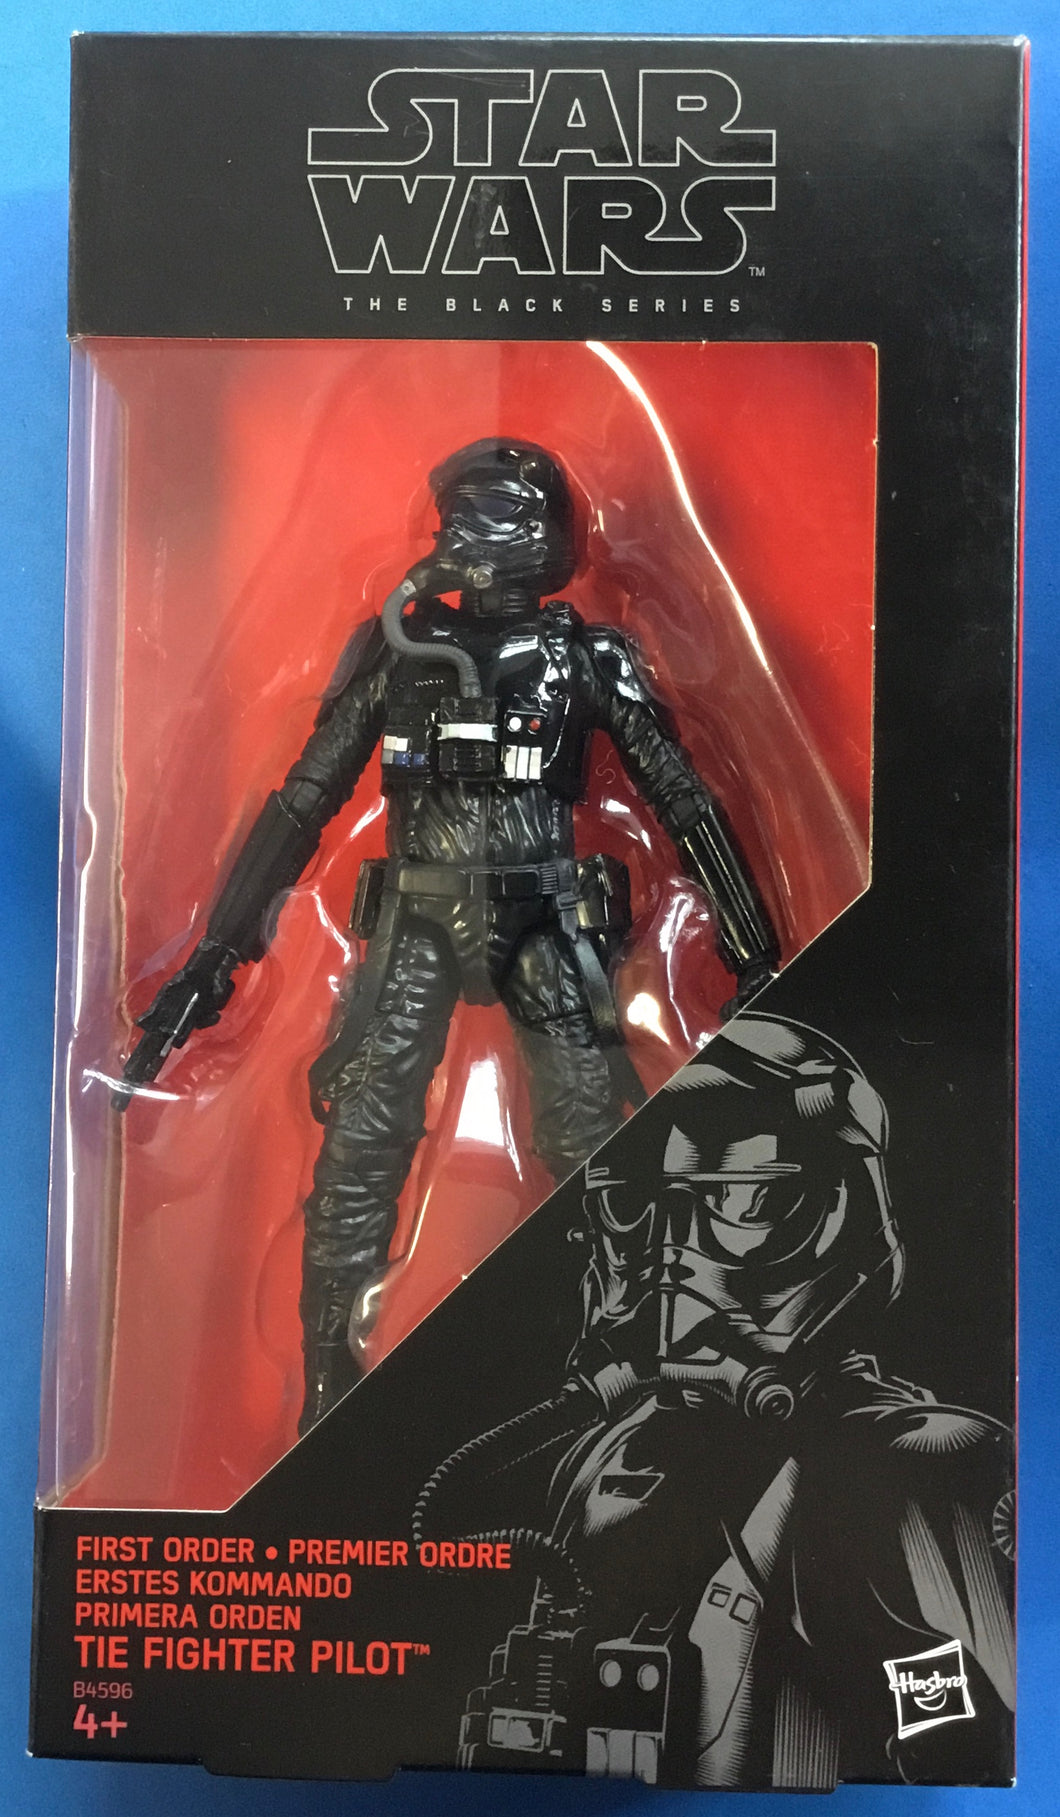 Star Wars The Black Series First Order Tie Fighter Pilot 6” Figure No. #11 2015 Hasbro